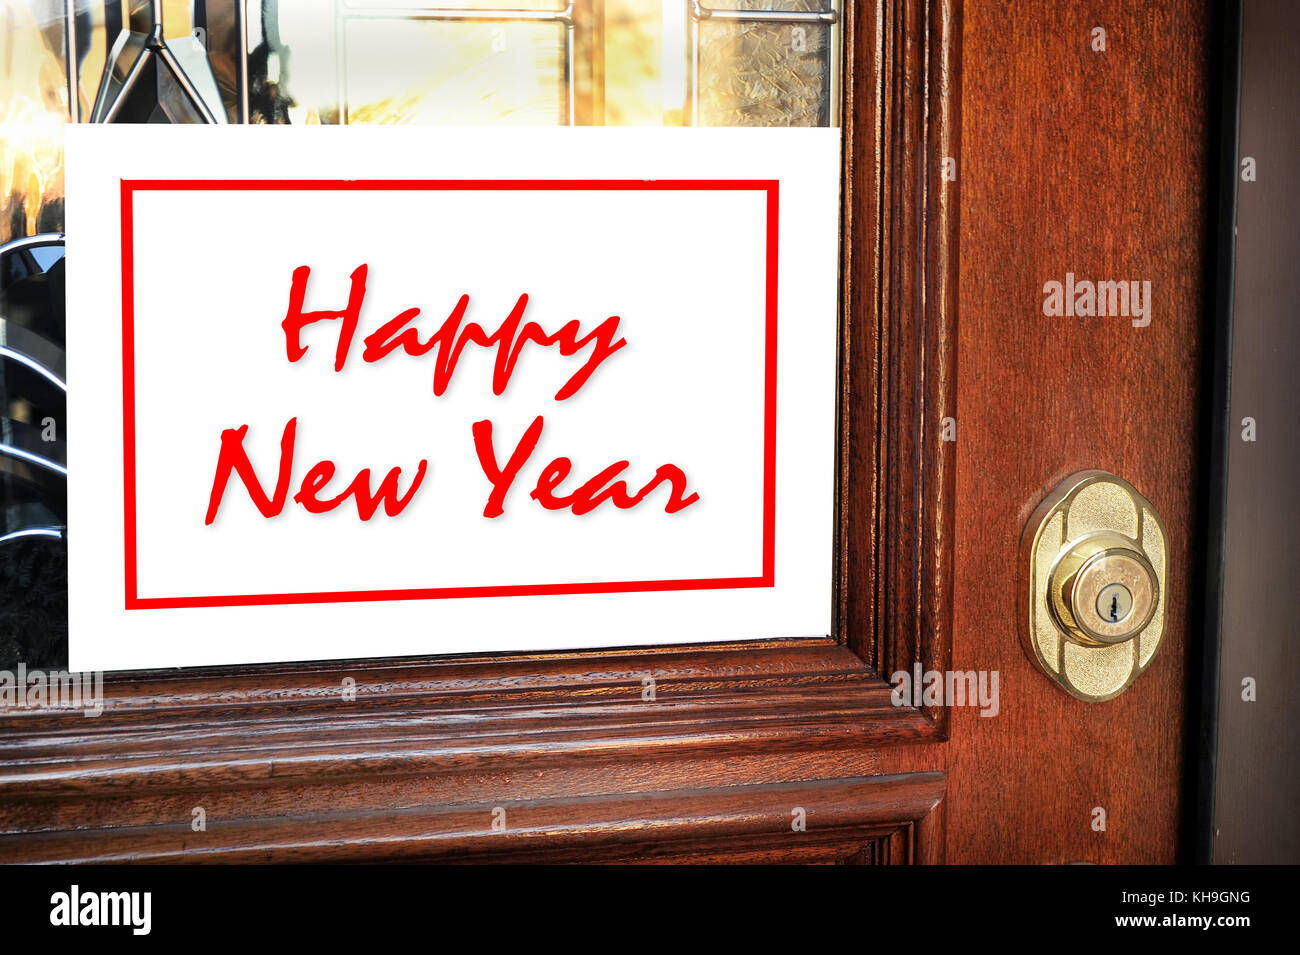 Happy New Year sign on home front door. Stock Photo